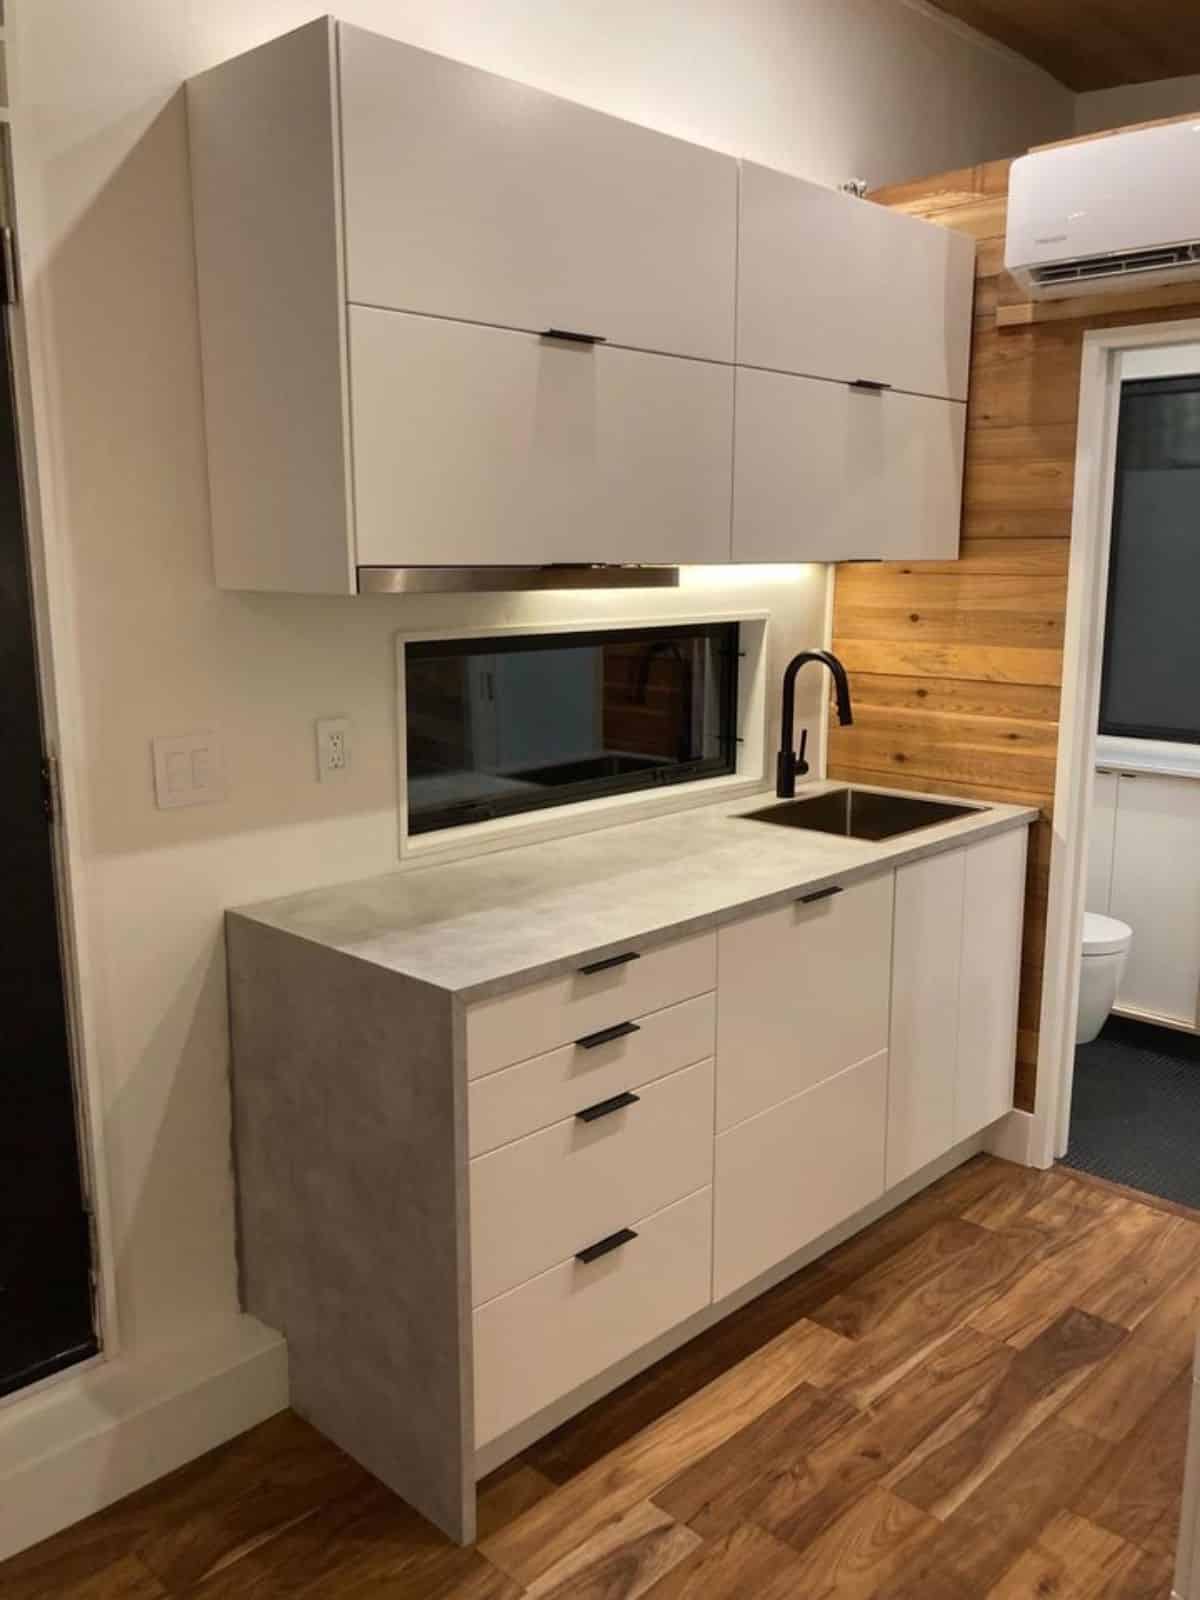 stylish and well organized kitchen area of 27’ tiny house in Dallas